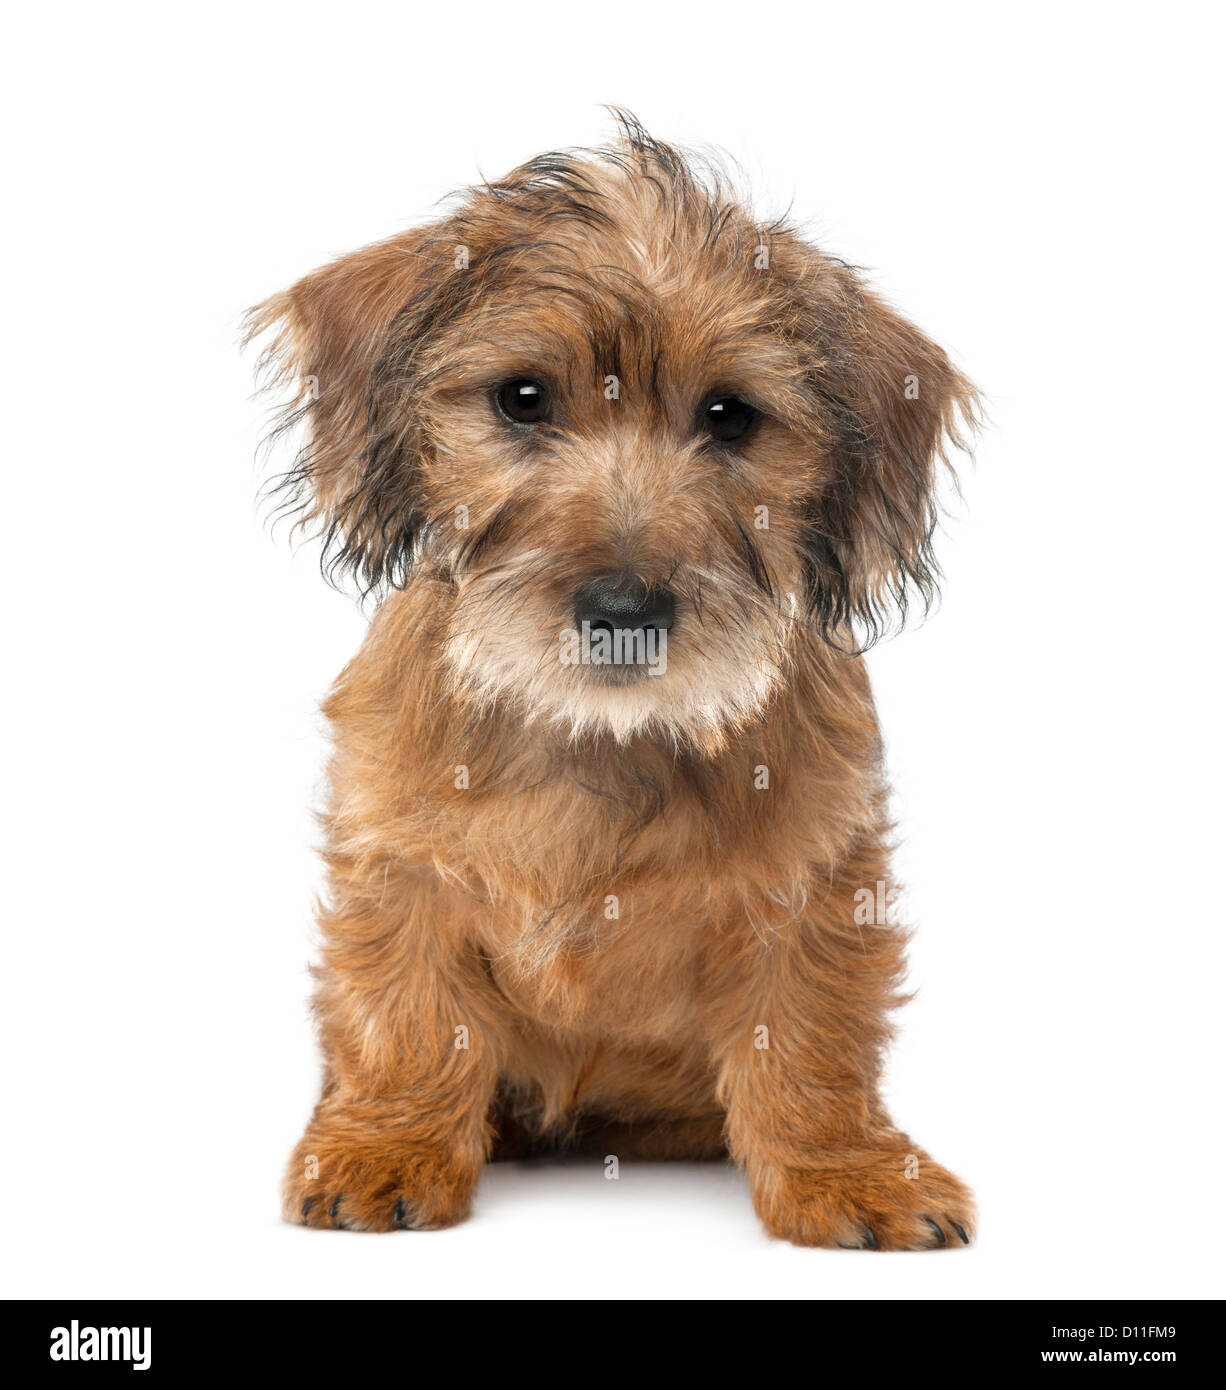 Mixed-breed dog puppy, 3 months old, sitting and looking at the camera against white background Stock Photo